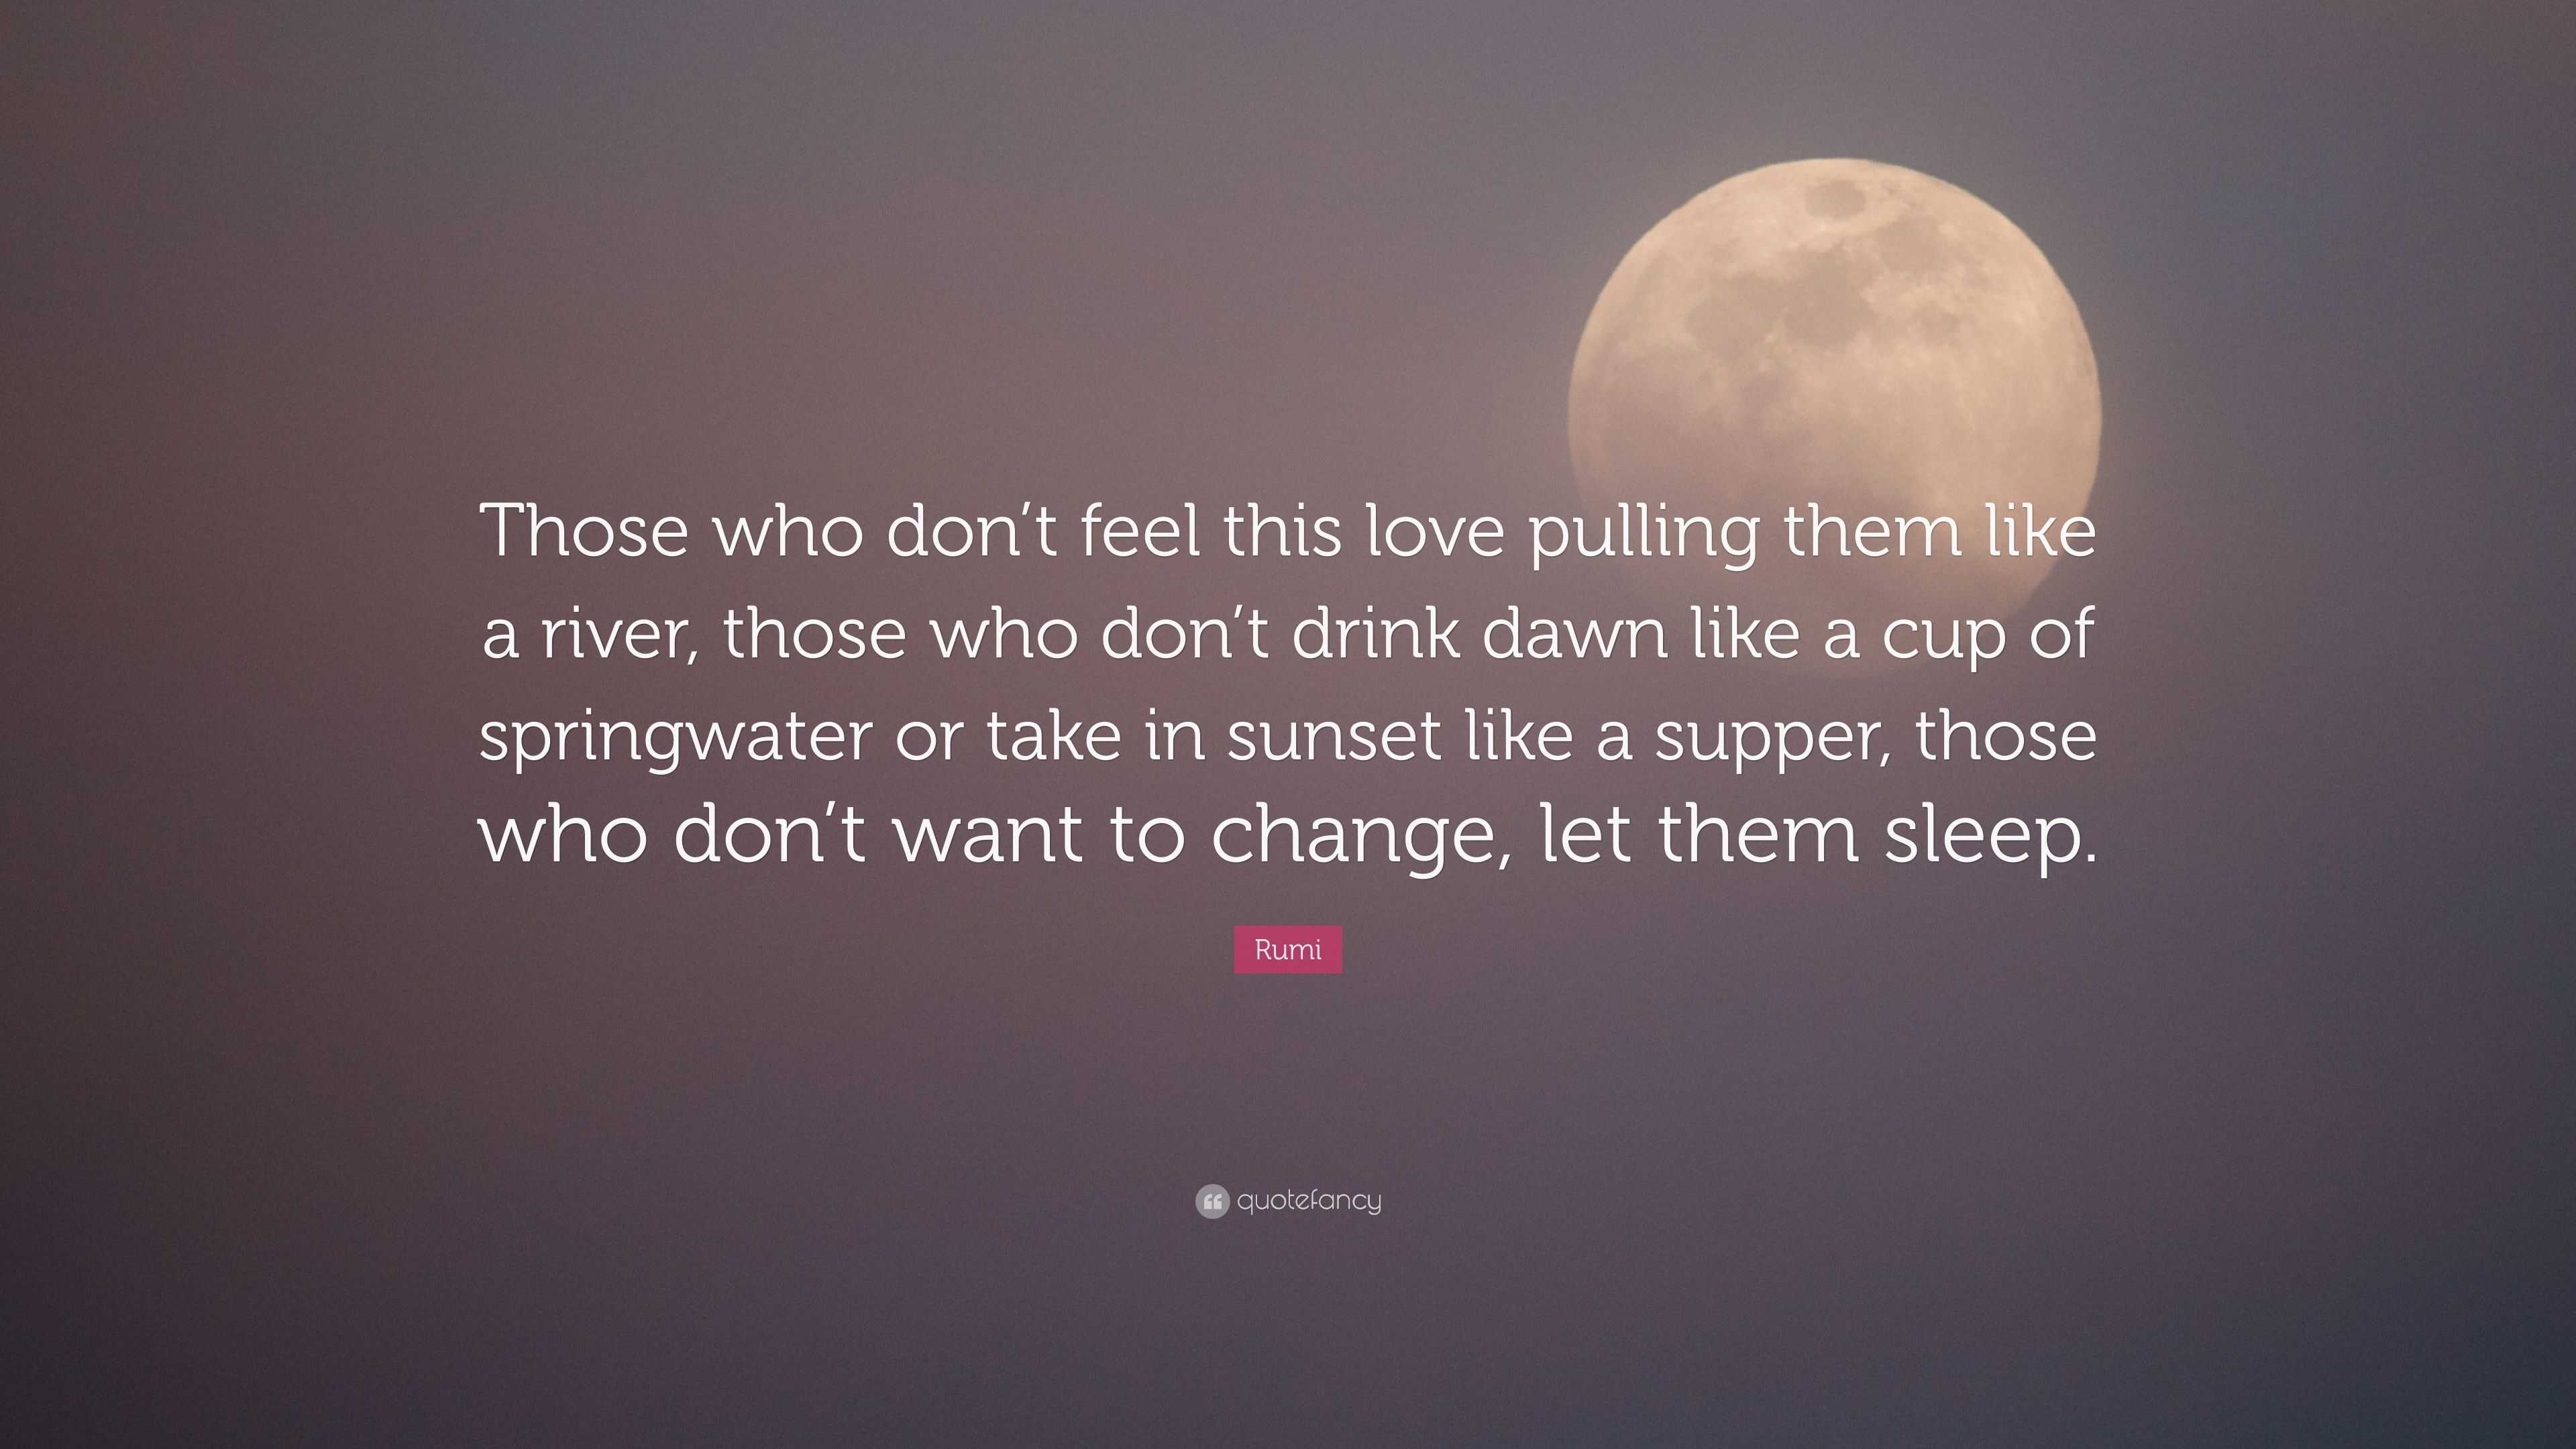 Rumi Quote “Those who don t feel this love pulling them like a